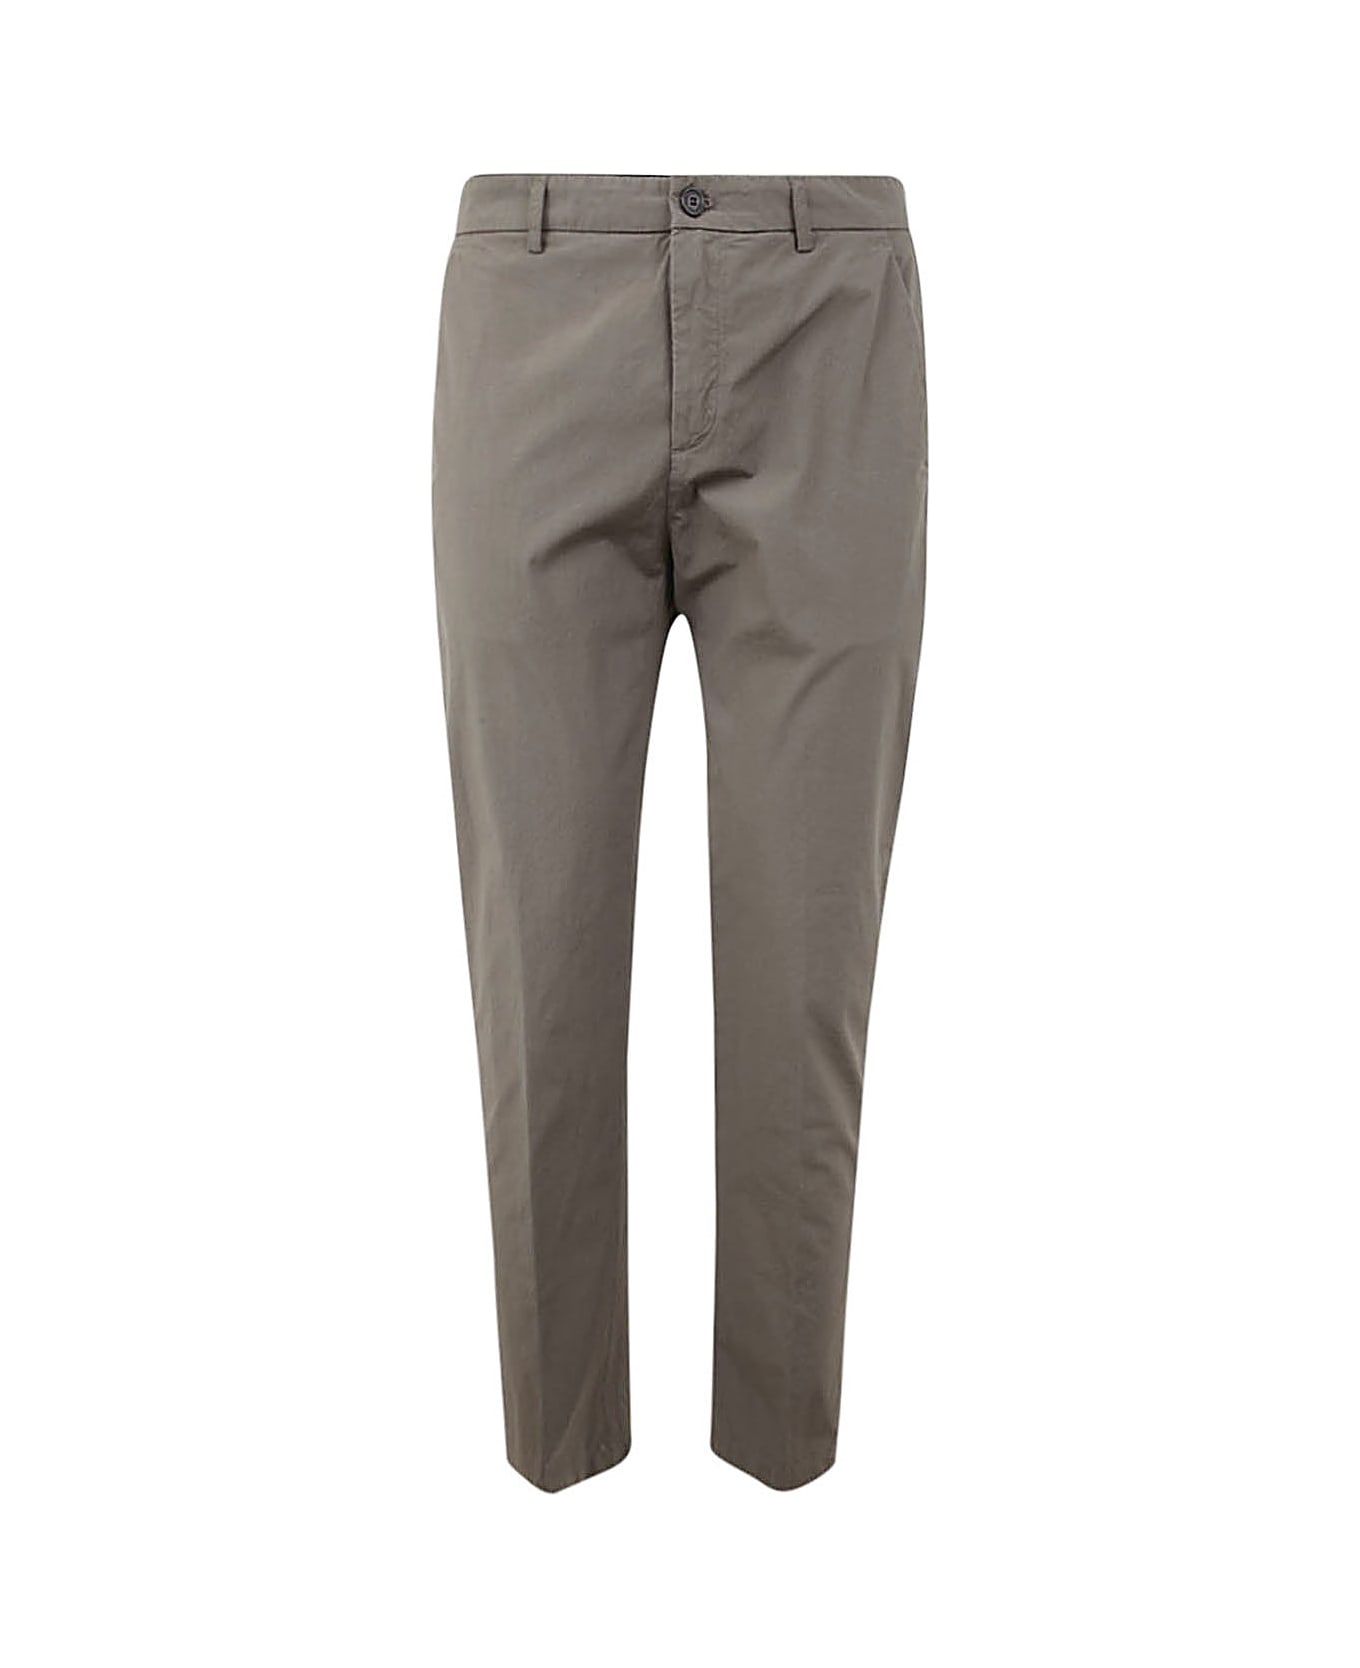 Department Five Prince Crop Chino Trousers - Taupe ボトムス